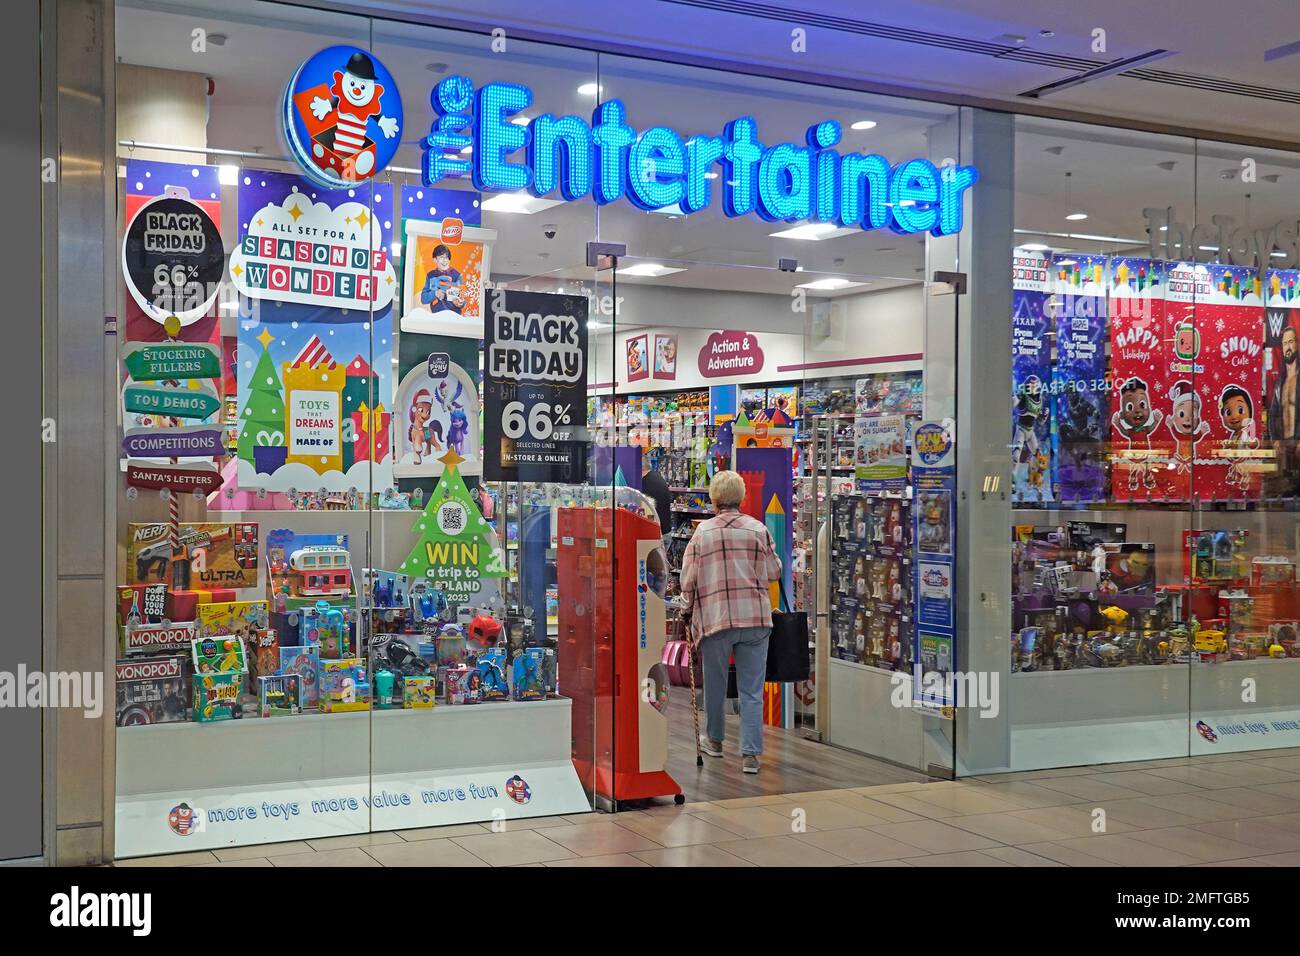 Entertainer retail toy shop front Xmas window display & business brand sign above entrance in Lakeside shopping centre store indoor shopping mall UK Stock Photo